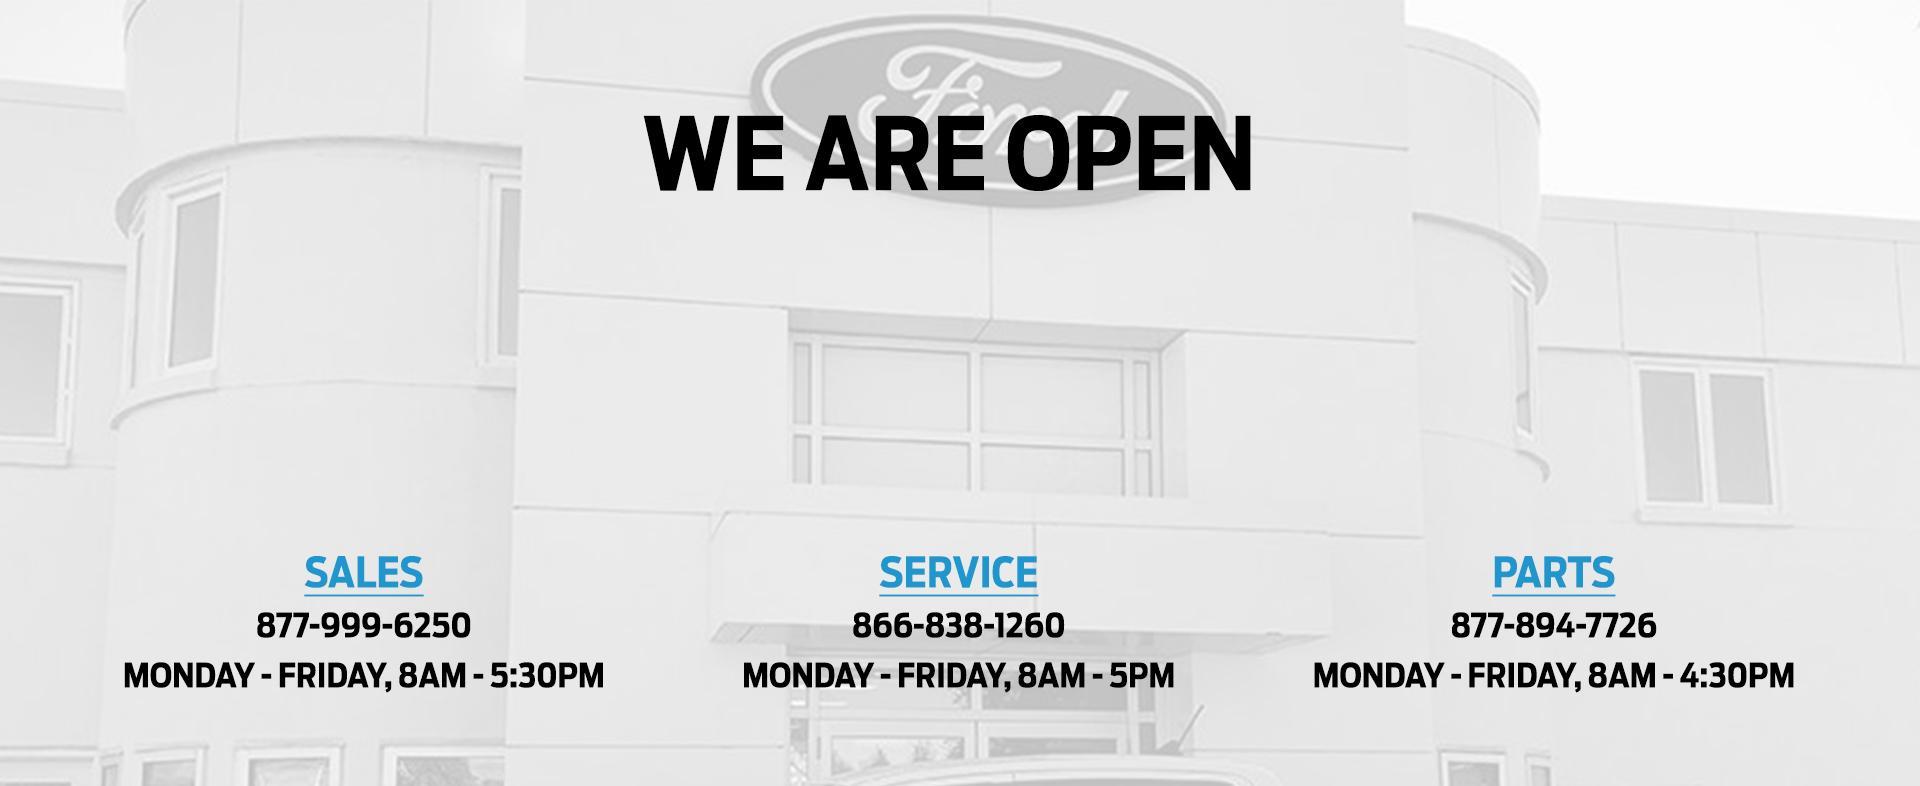 CSL Ford Sales is OPEN